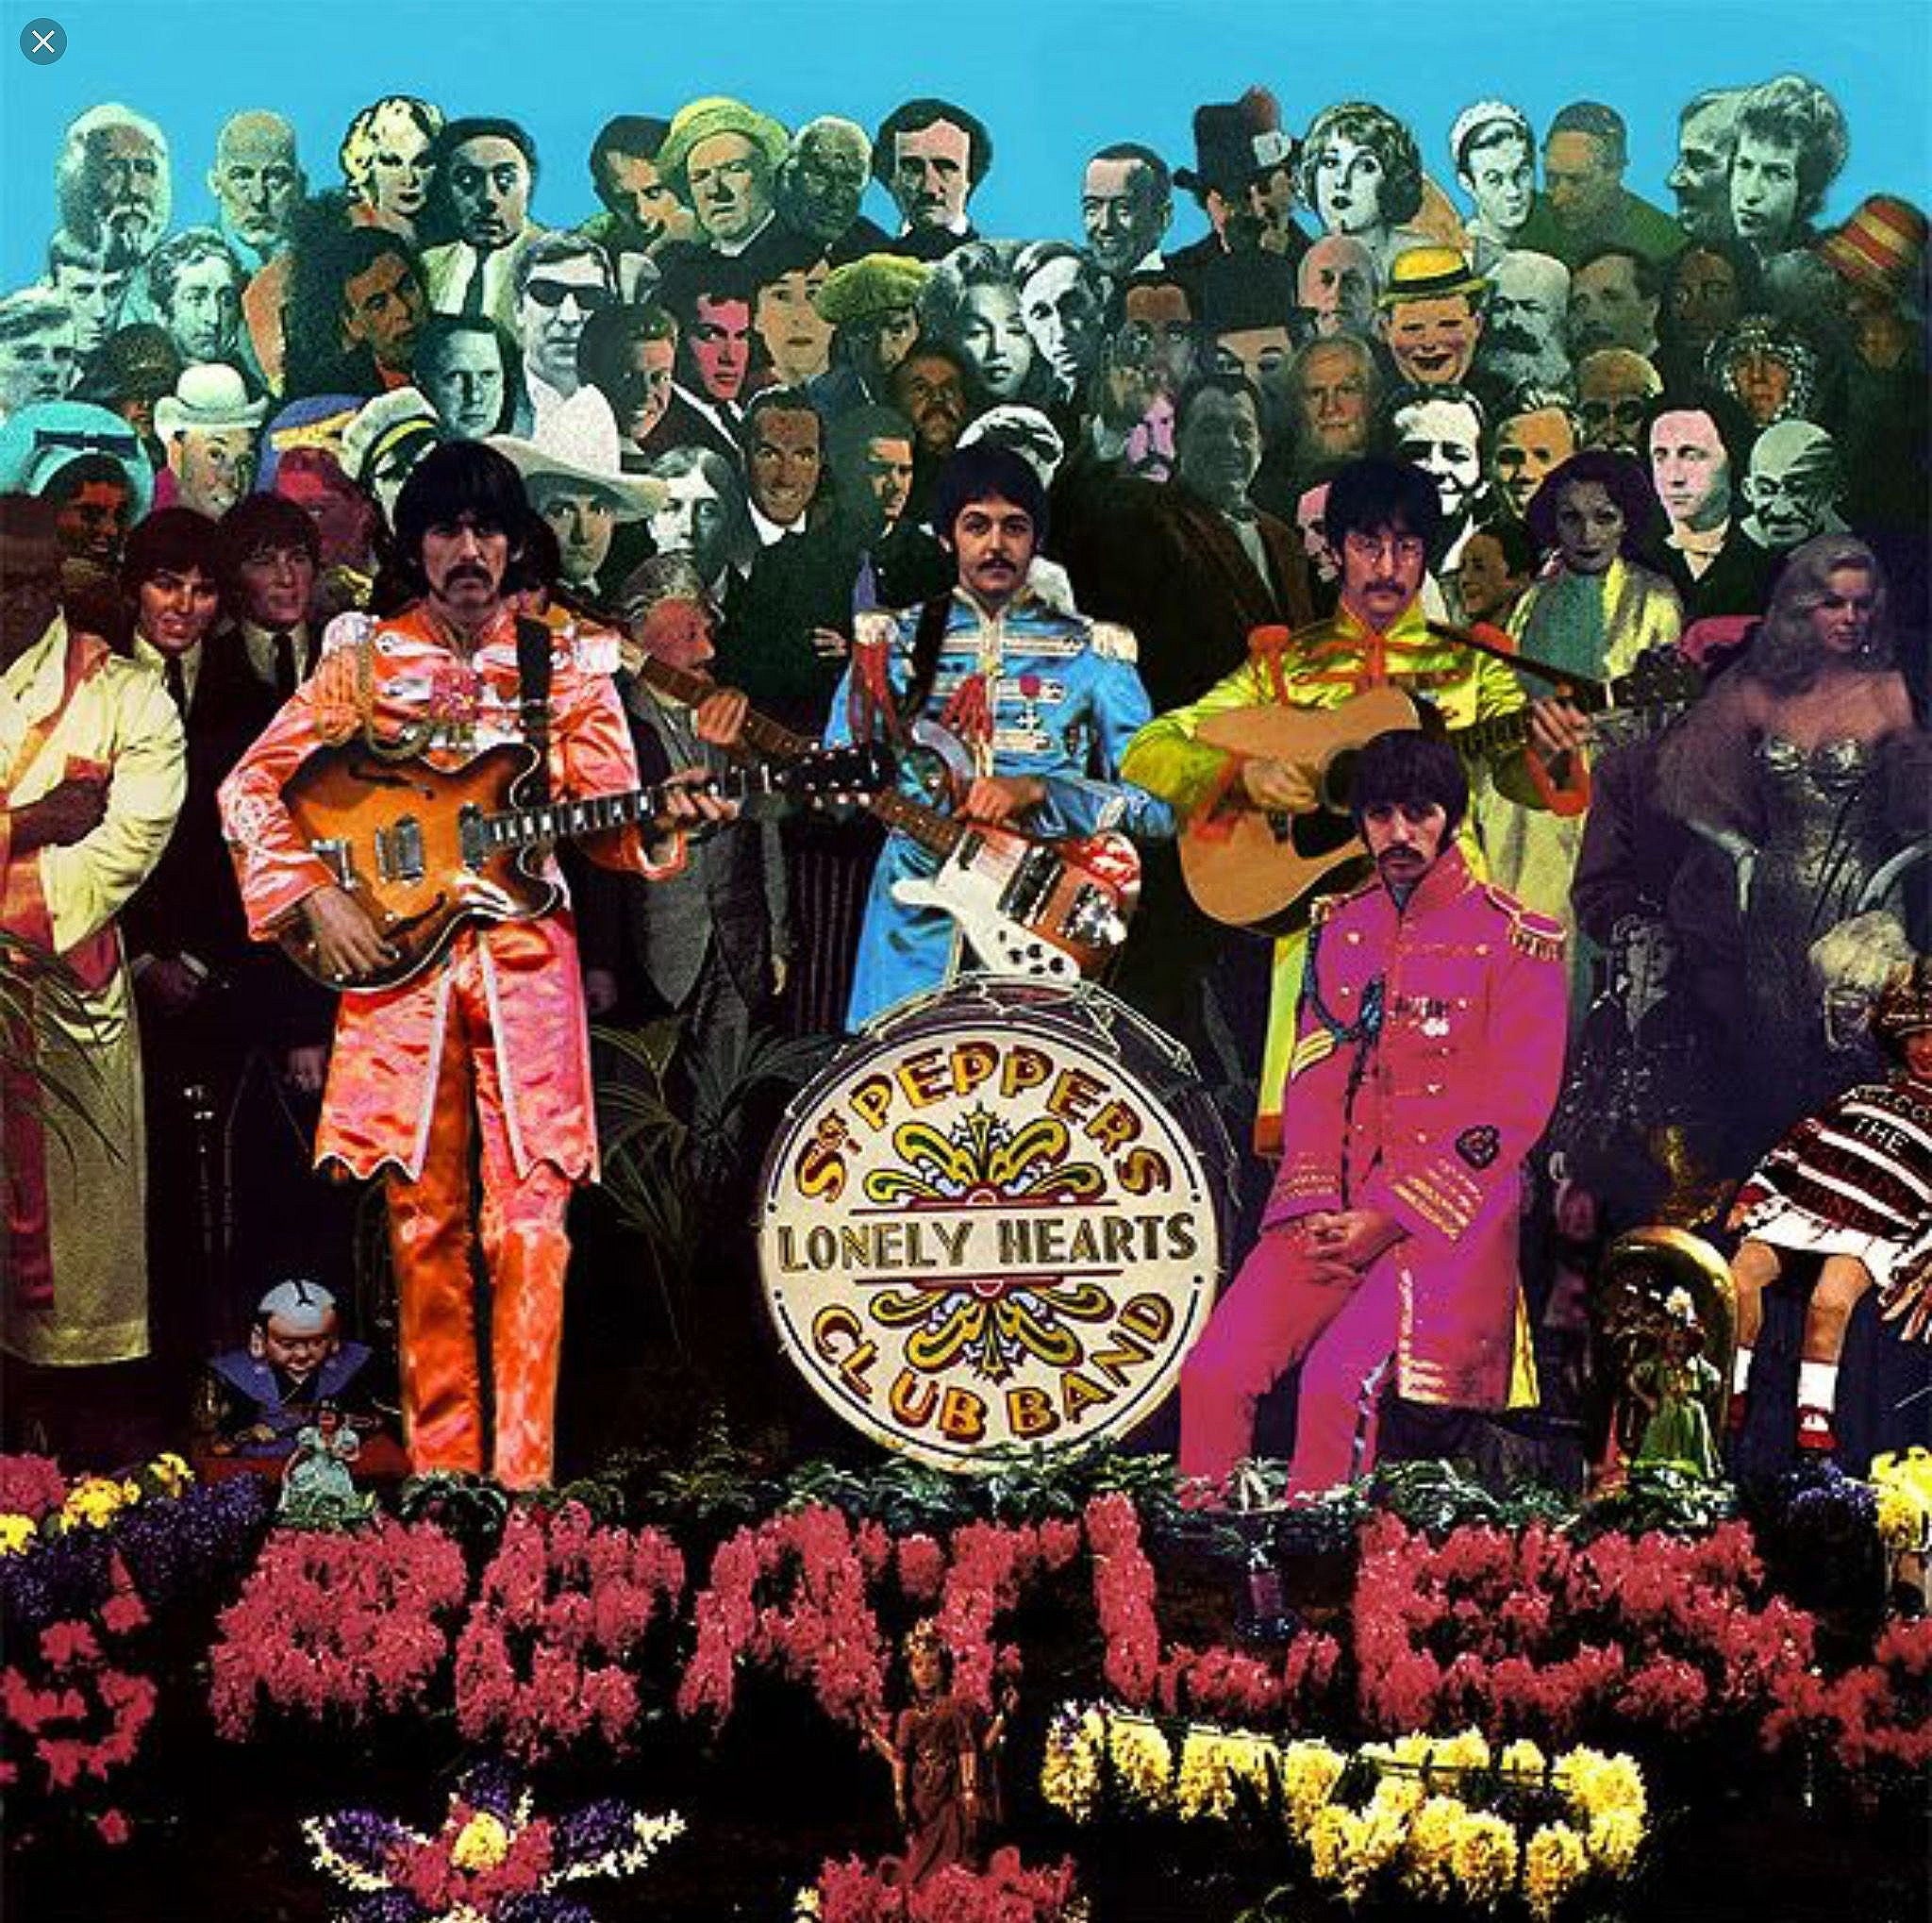 The Beatles Sgt Peppers Lonely Hearts Club Band Album Cover